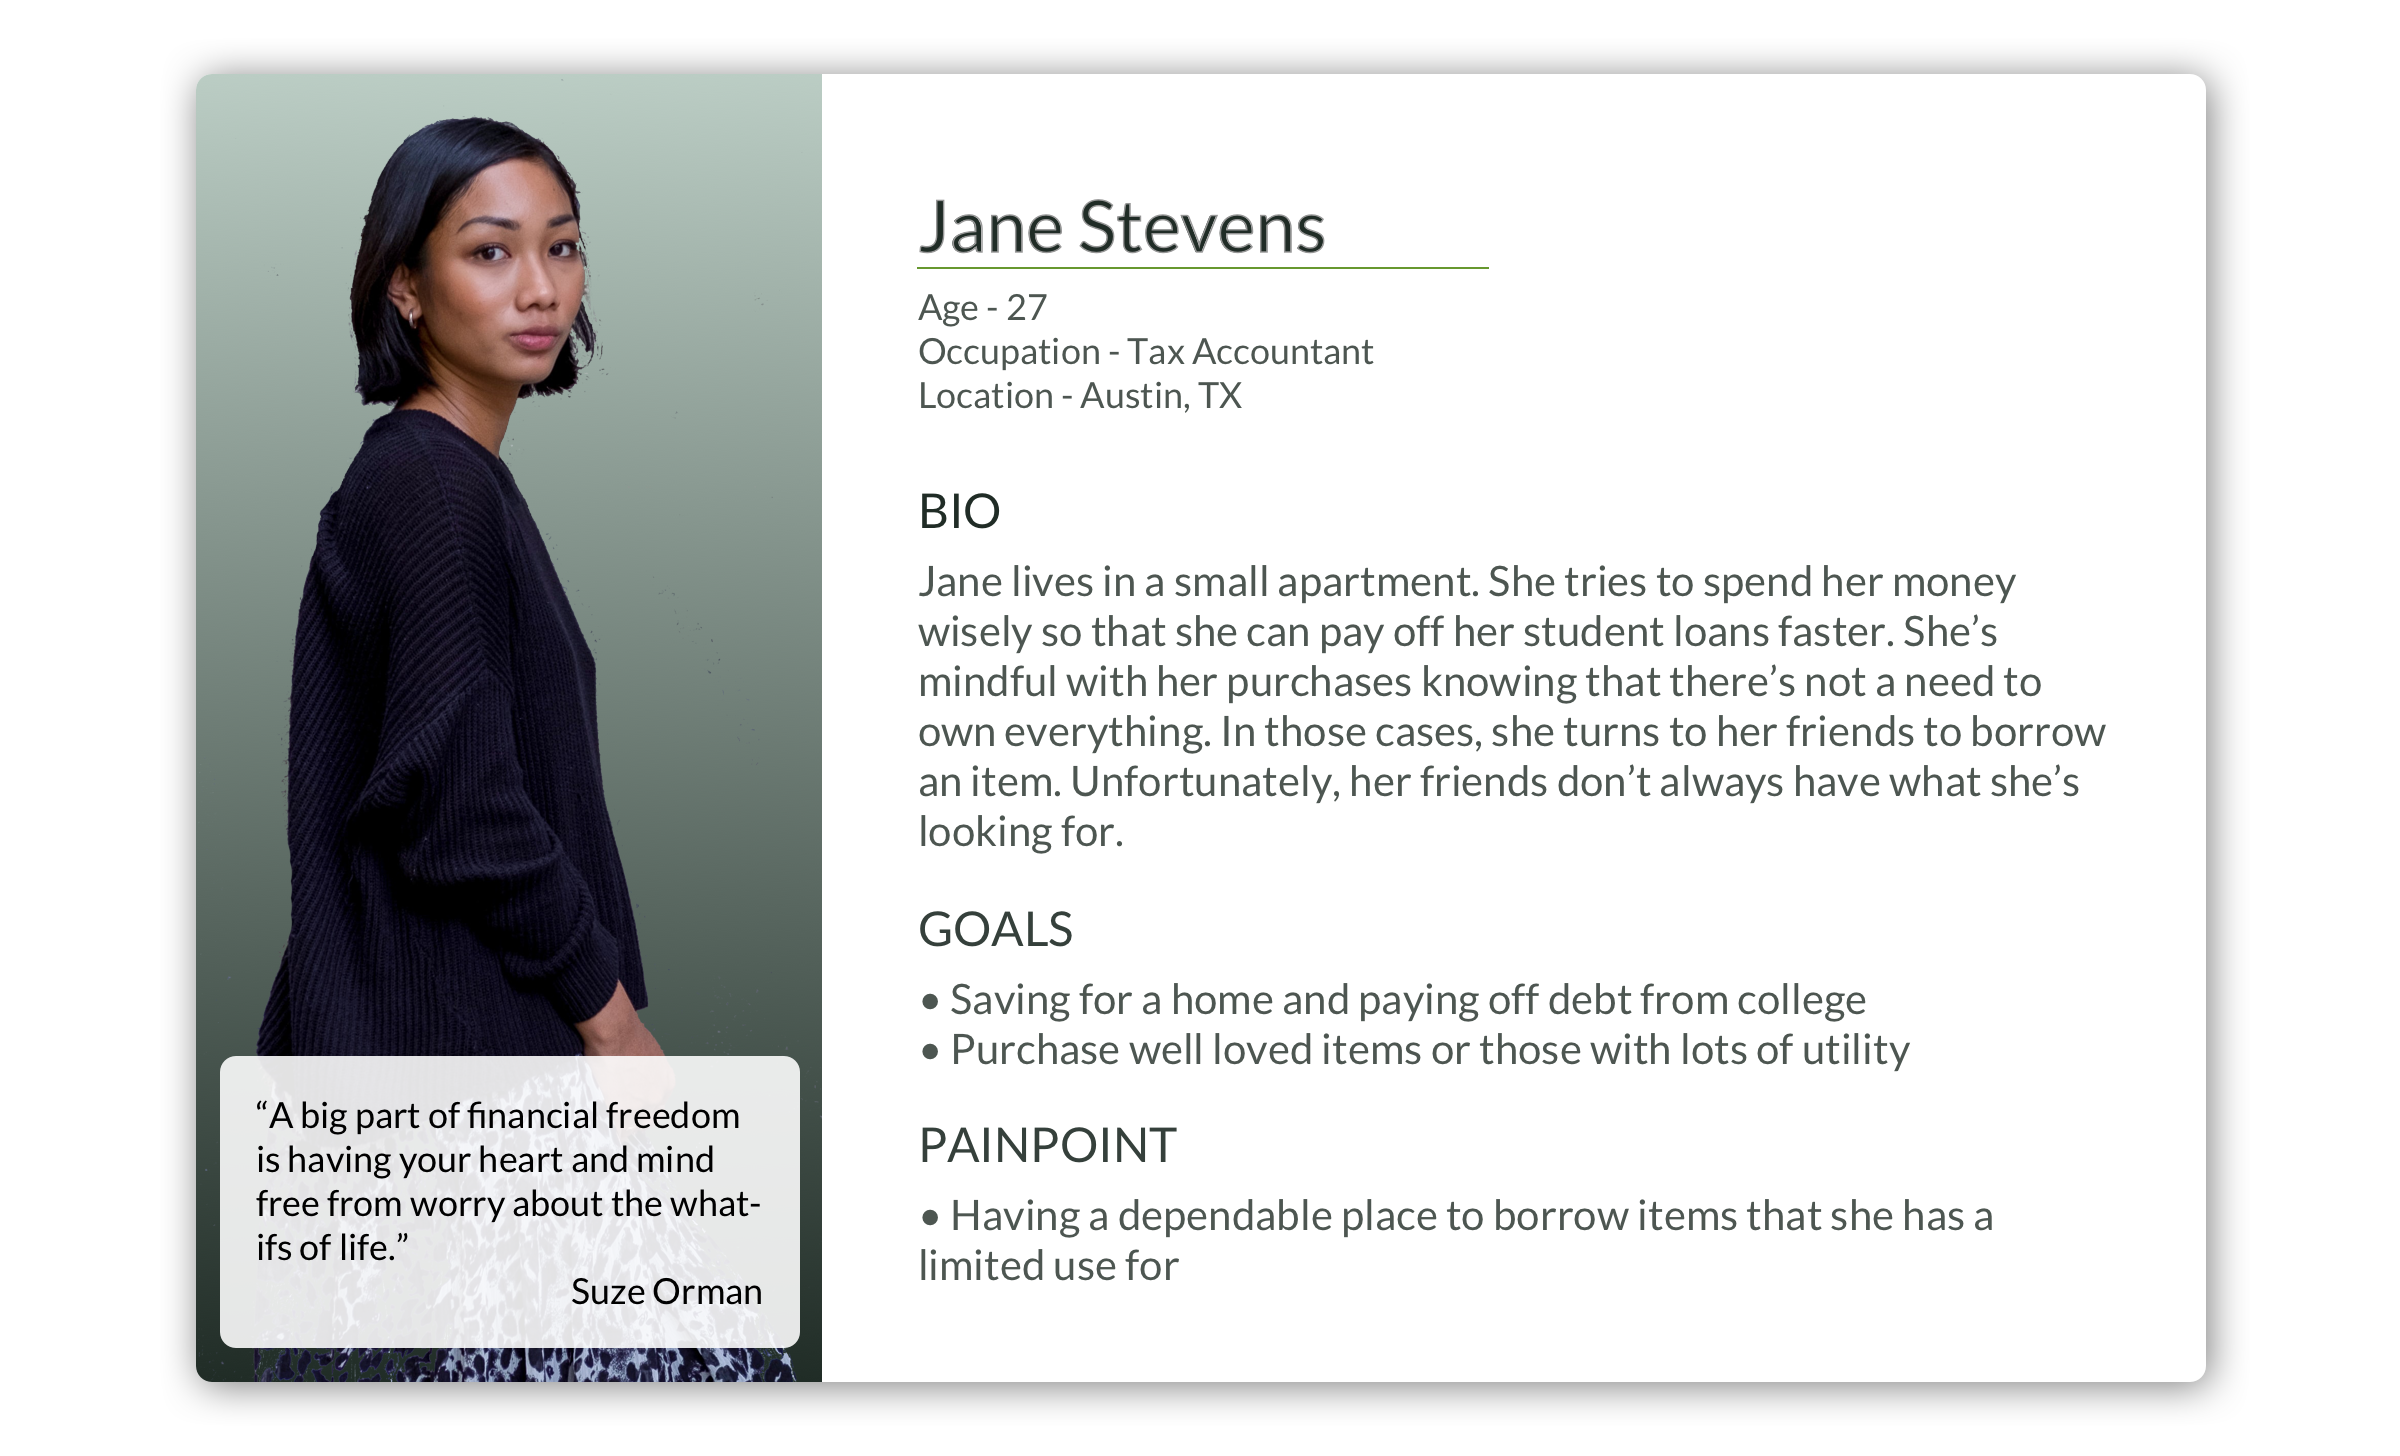 User Persona showcasing Jane Stevens. She's a tax account that is saving for a home and paying off college debt. She values her limited space and hates clutter. One of her biggest painpoints is spending money on items she'll only use once or twice. She's resourceful, artsy, and an optimist.